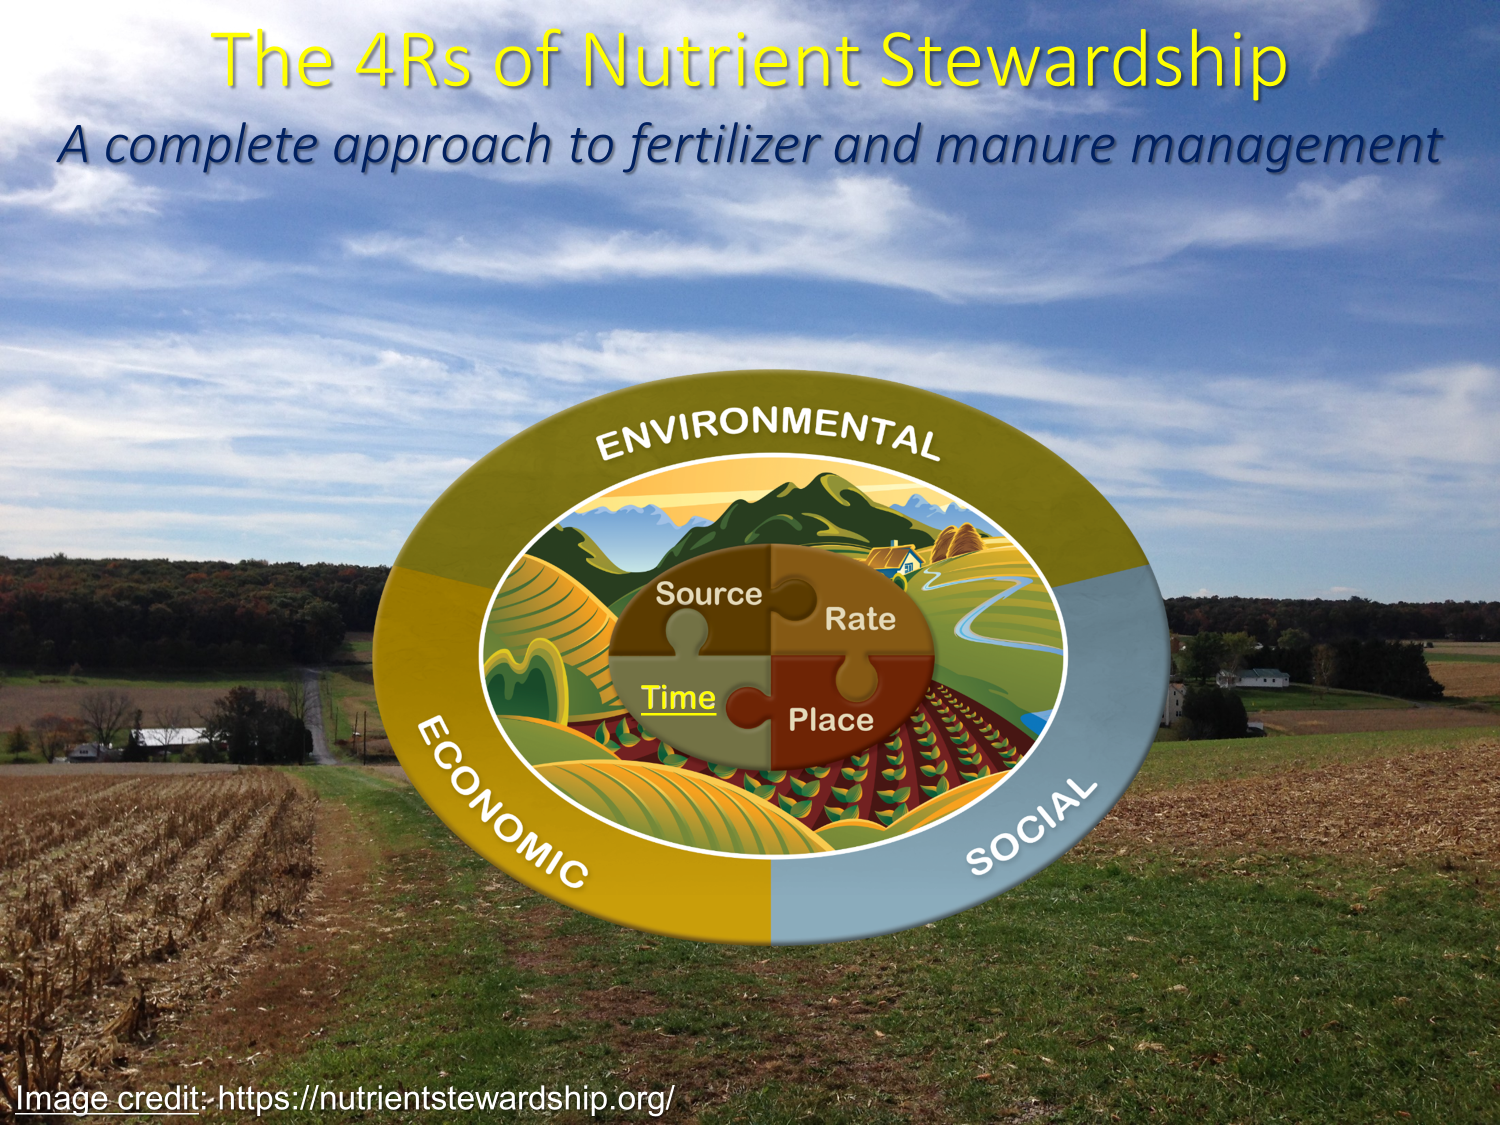 Figure1: The 4Rs of nutrient stewardship provide a framework for guiding fertilizer and manure applications. The 4Rs include the right source, right rate, right time, and right place. Runoff forecasting is intended to address the timing component of 4R nutrient management. 